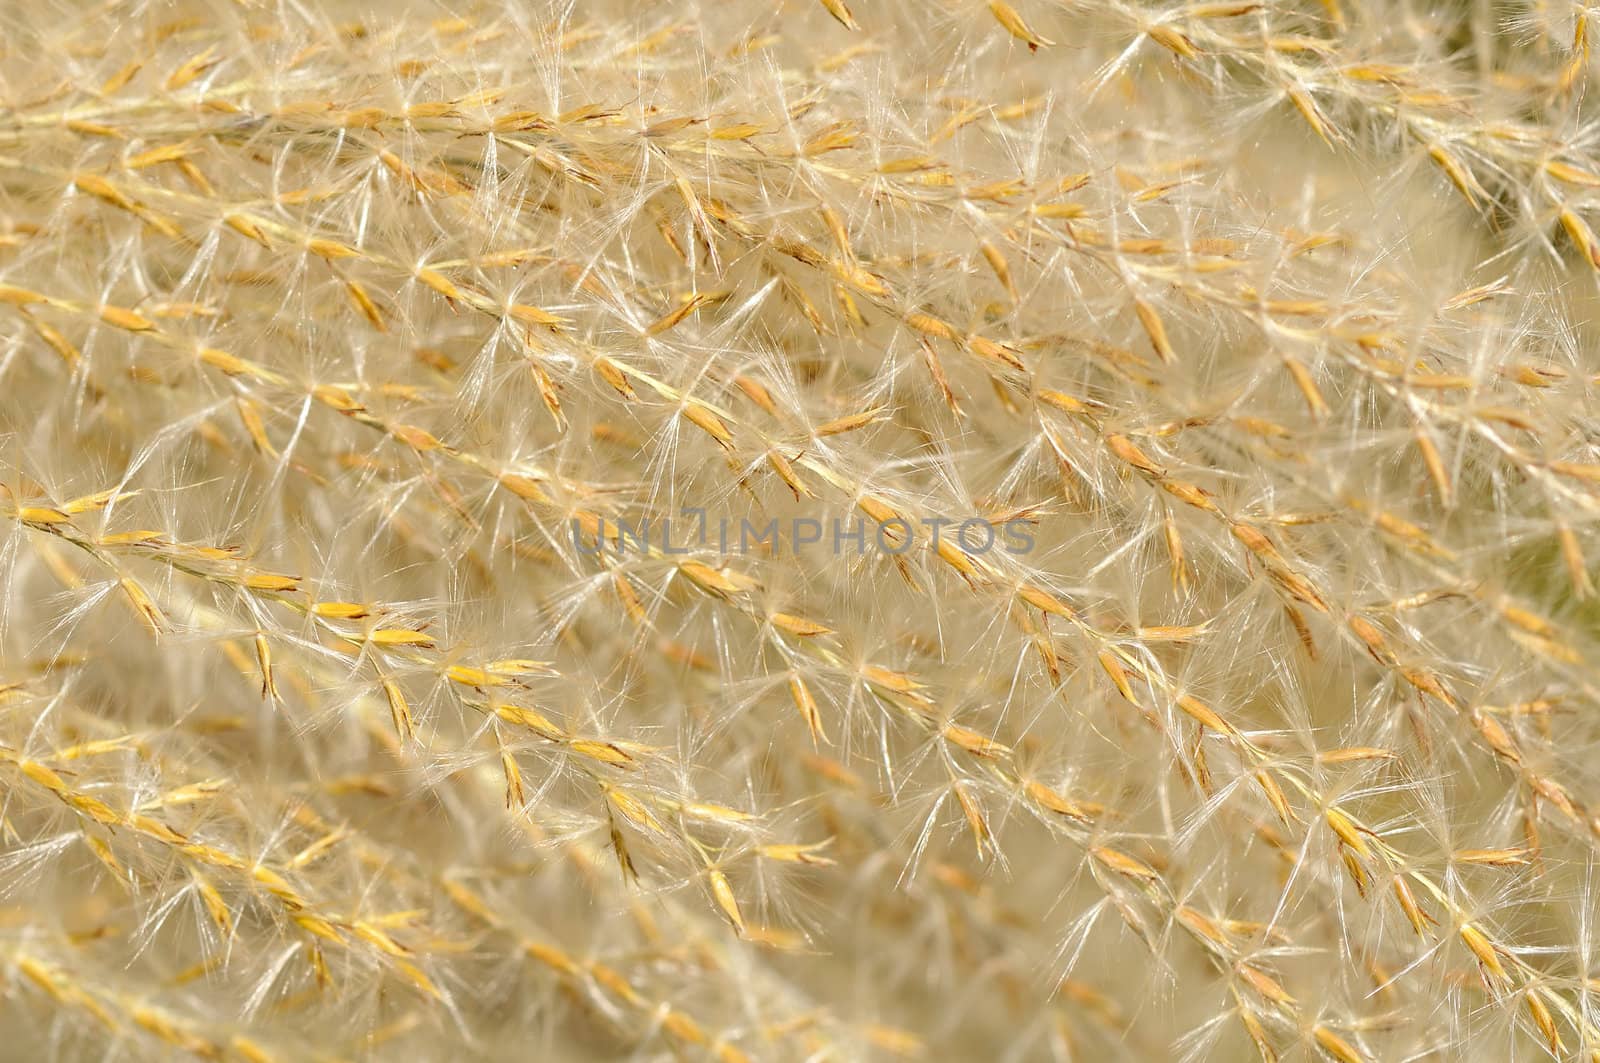 Close-up of hairy pampa grass plumes